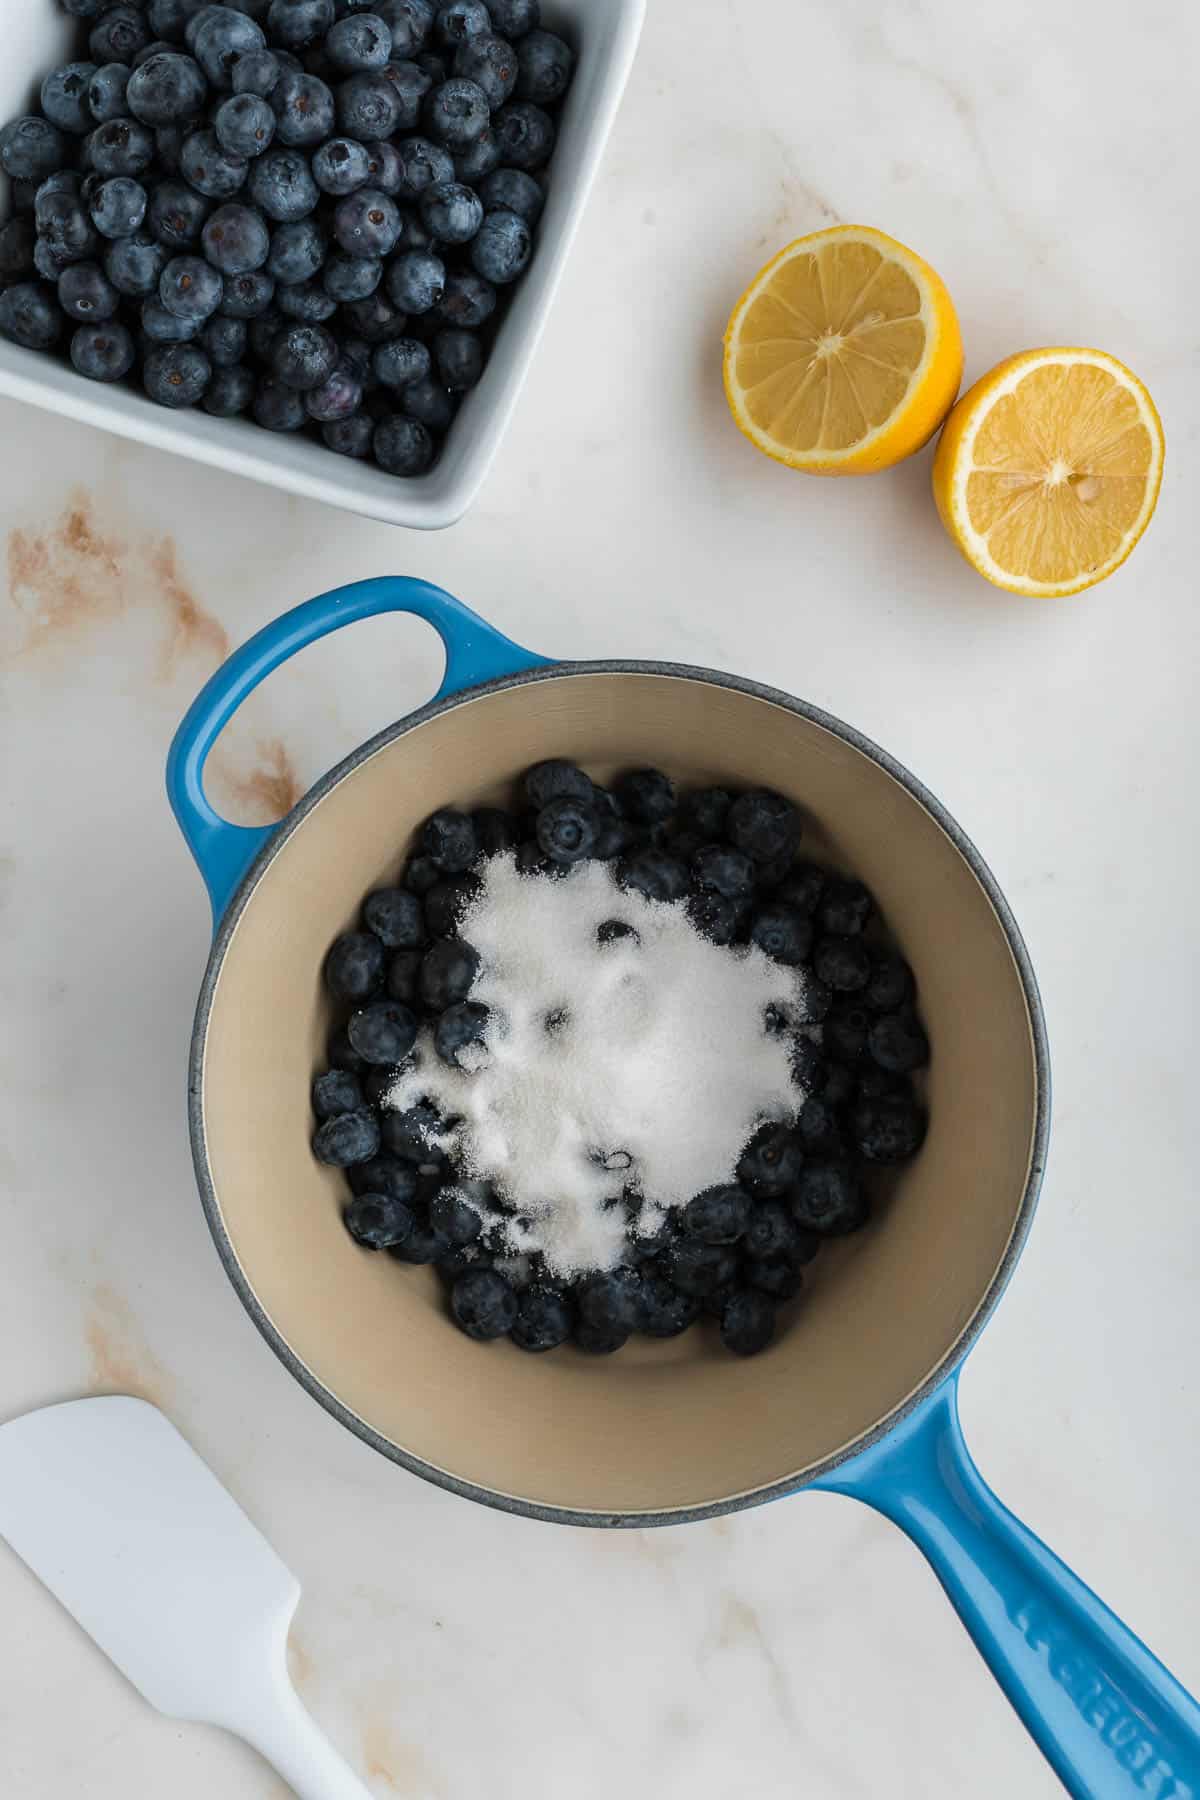 Ingredients for blueberry compote added to a saucepan.